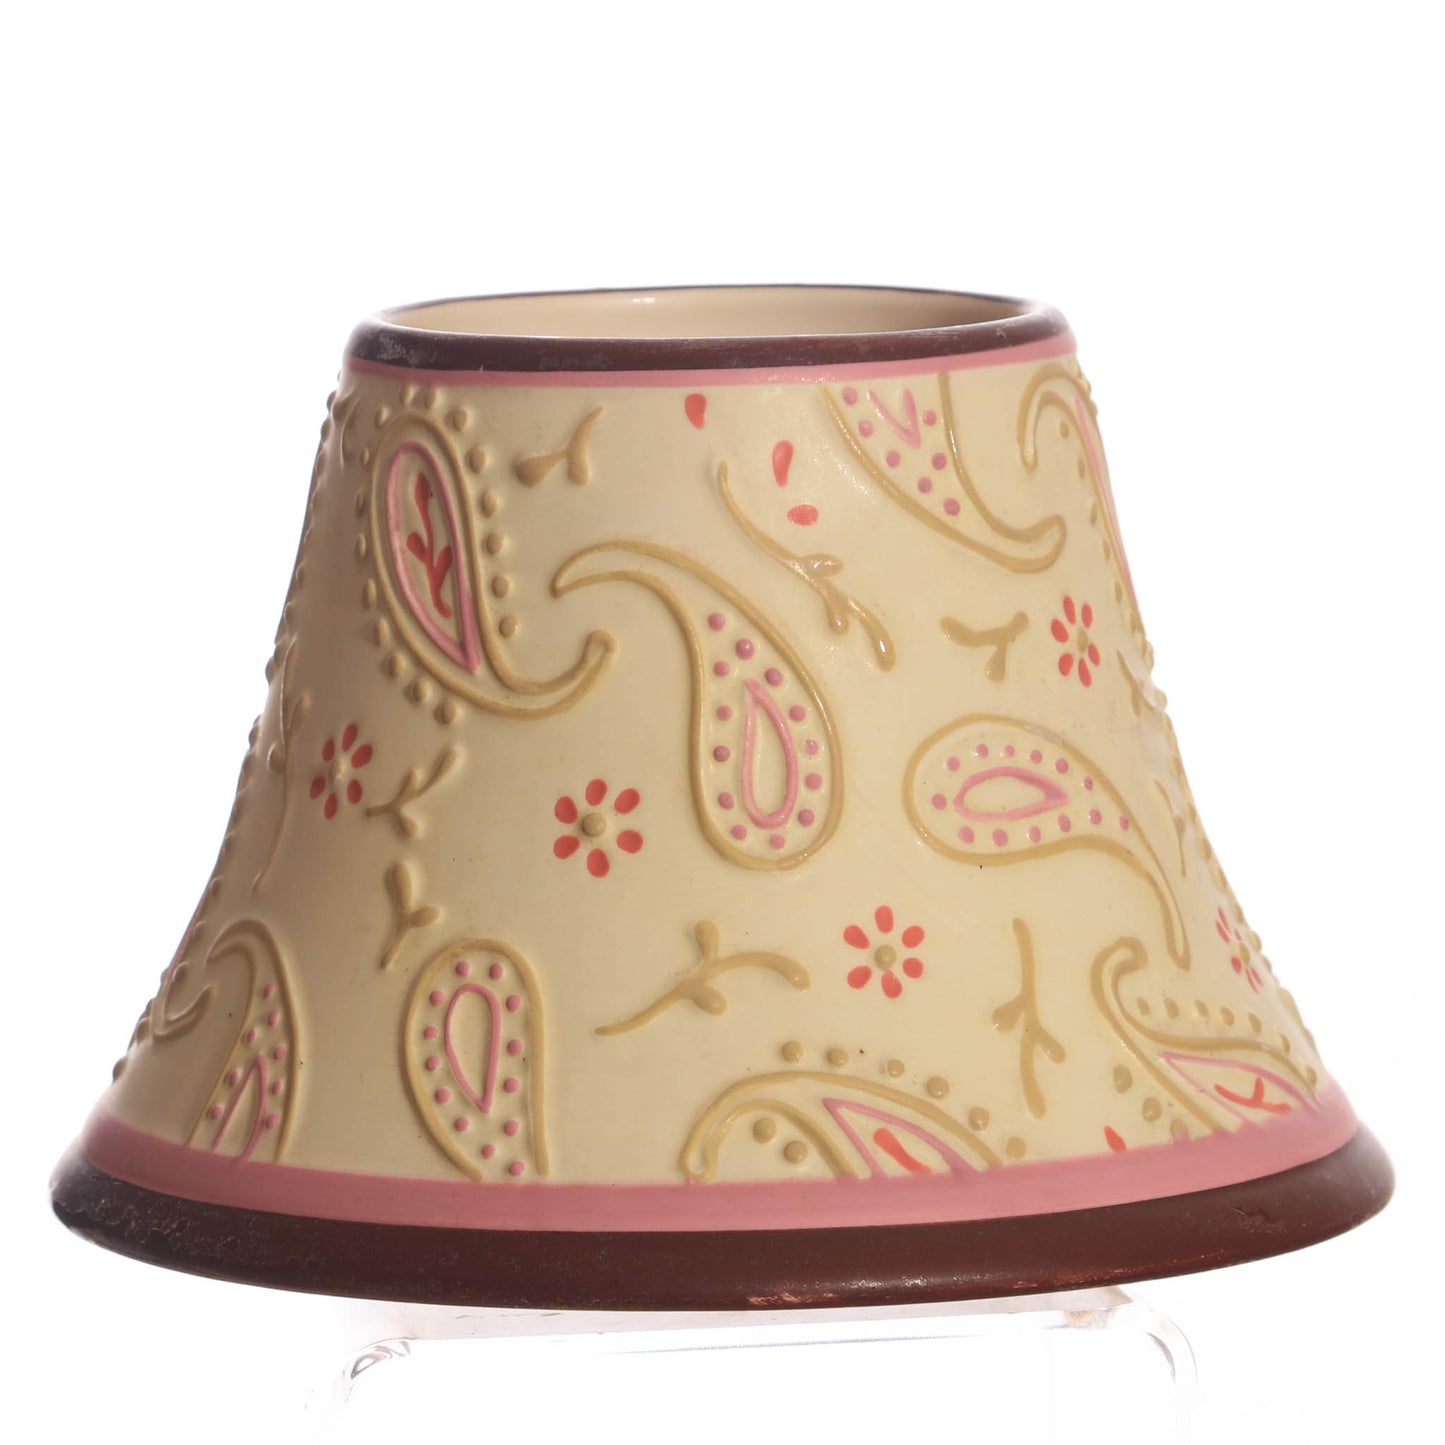 Yankee Candle Shade and tray for Medium Large Candles, Deco Swirl